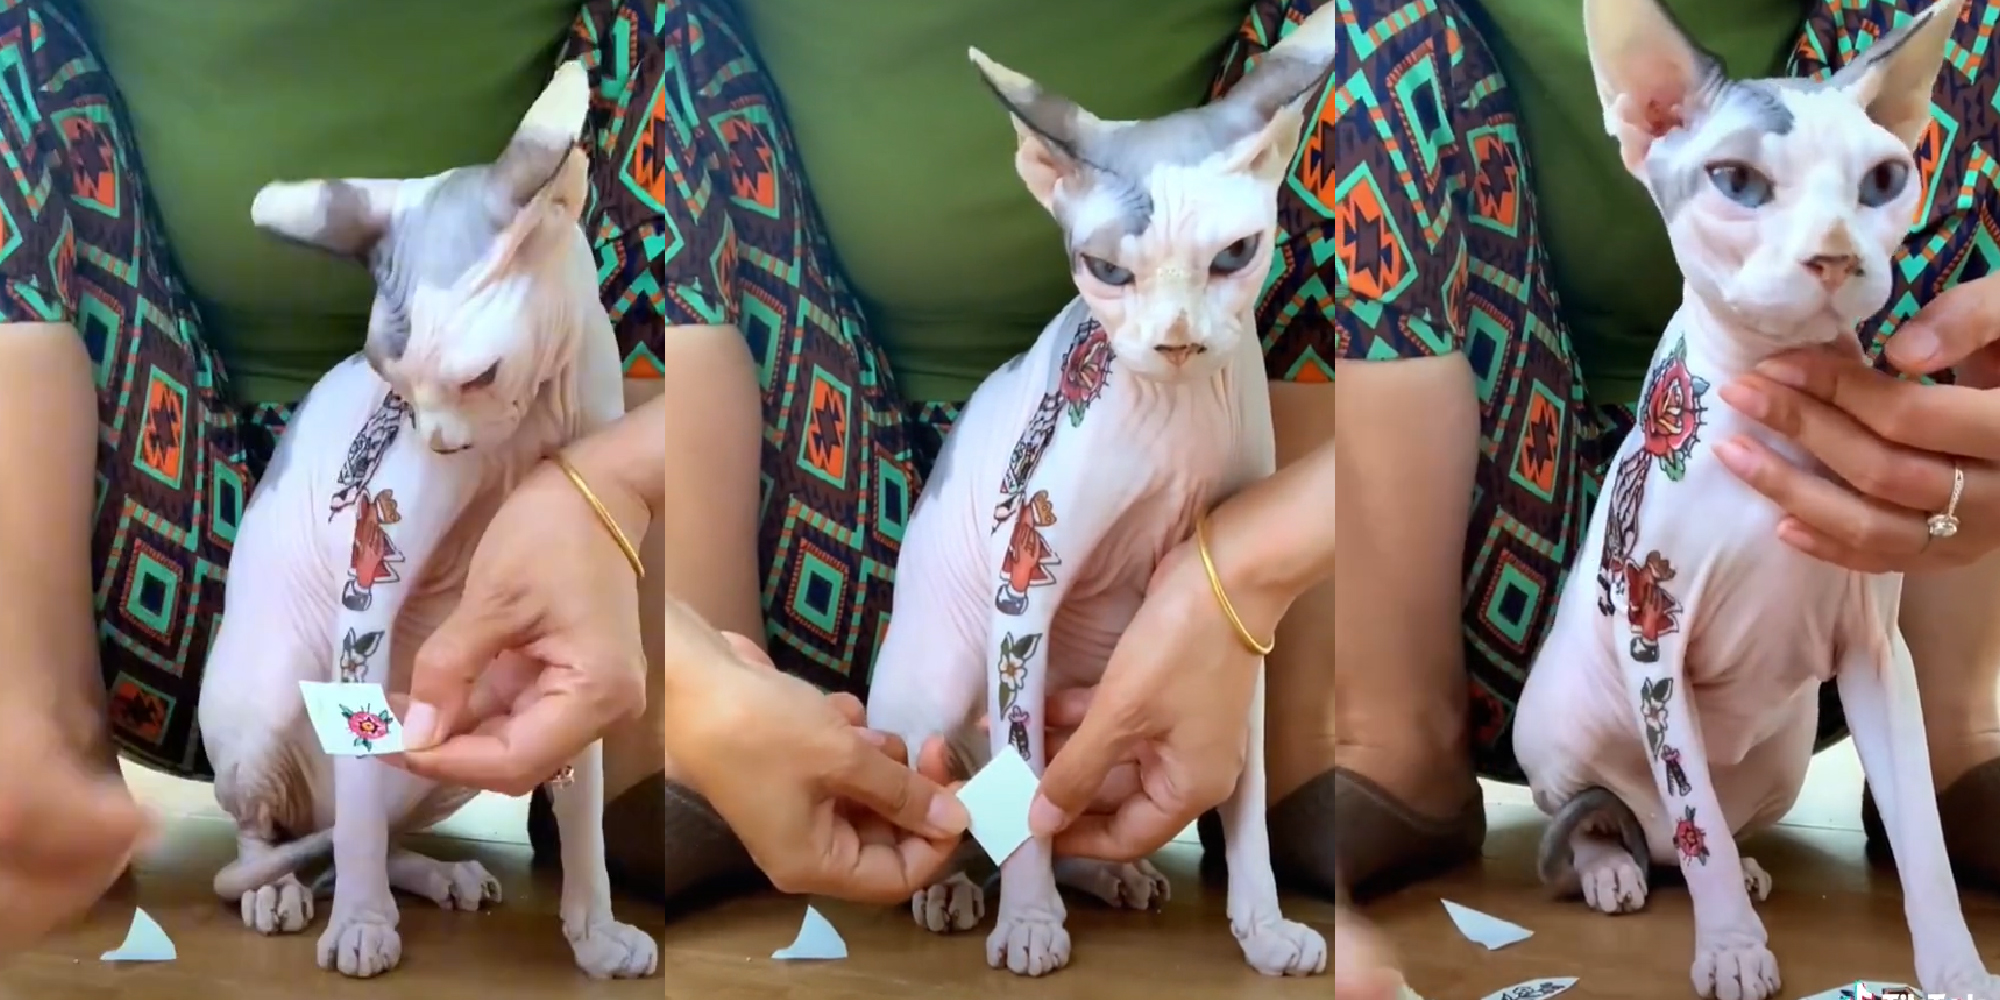 Woman Puts Temporary Tattoos On Hairless Cat Sparking Debate